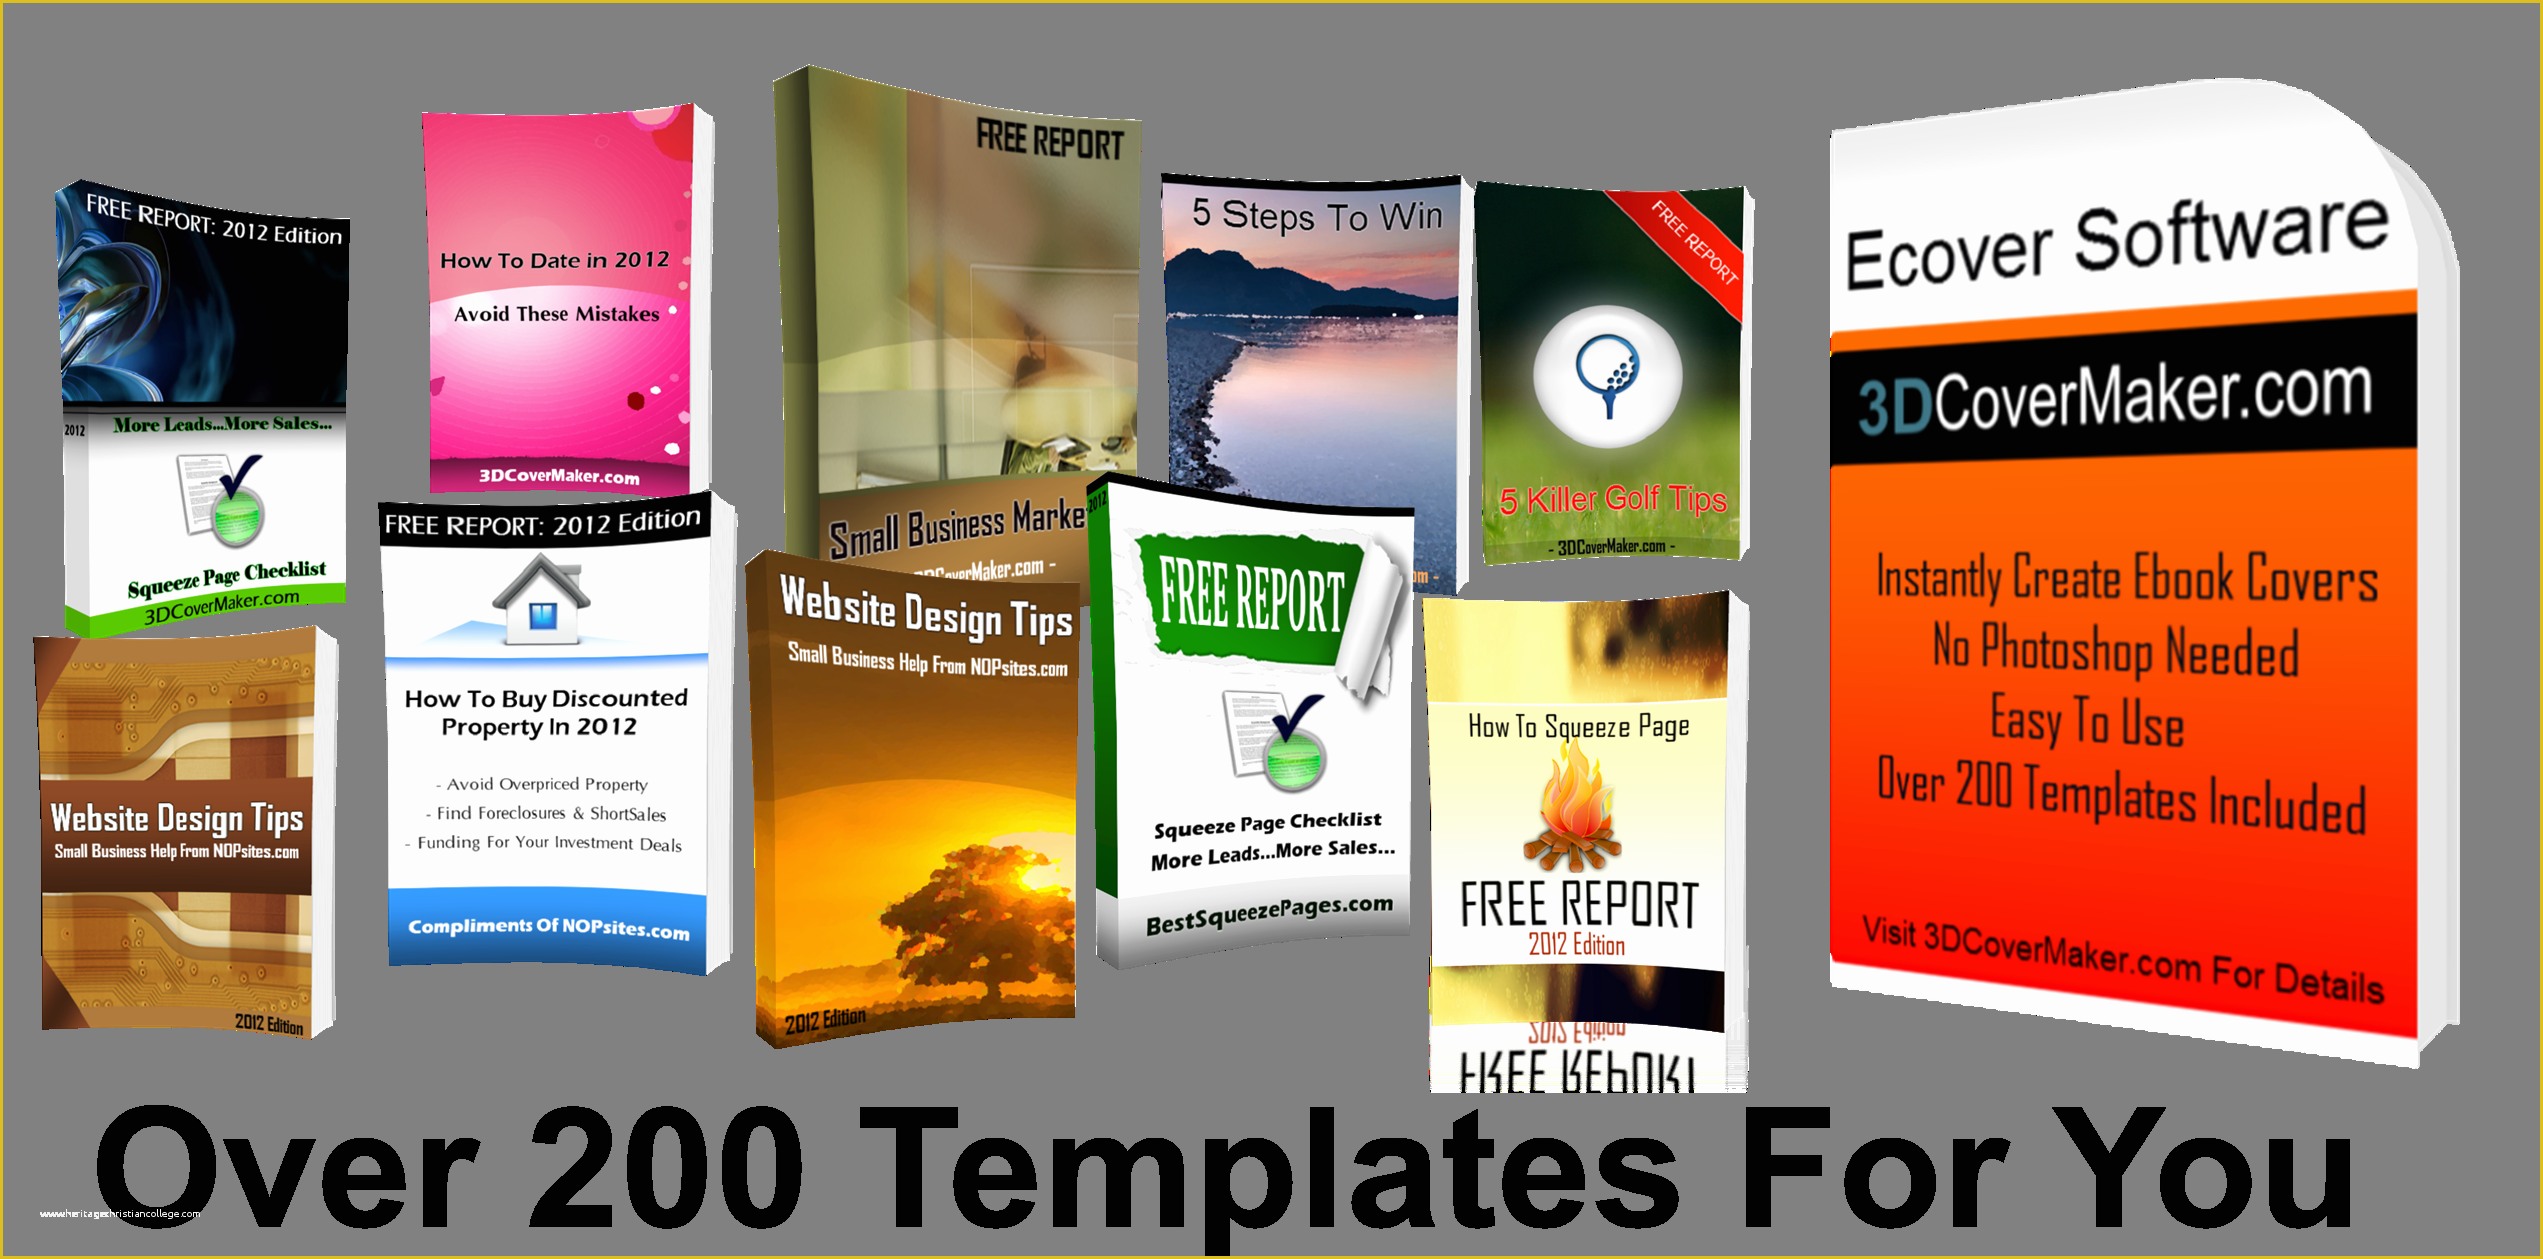 Free Ebook Templates Of 3d Cover Maker Ebook software Create Unlimited Covers